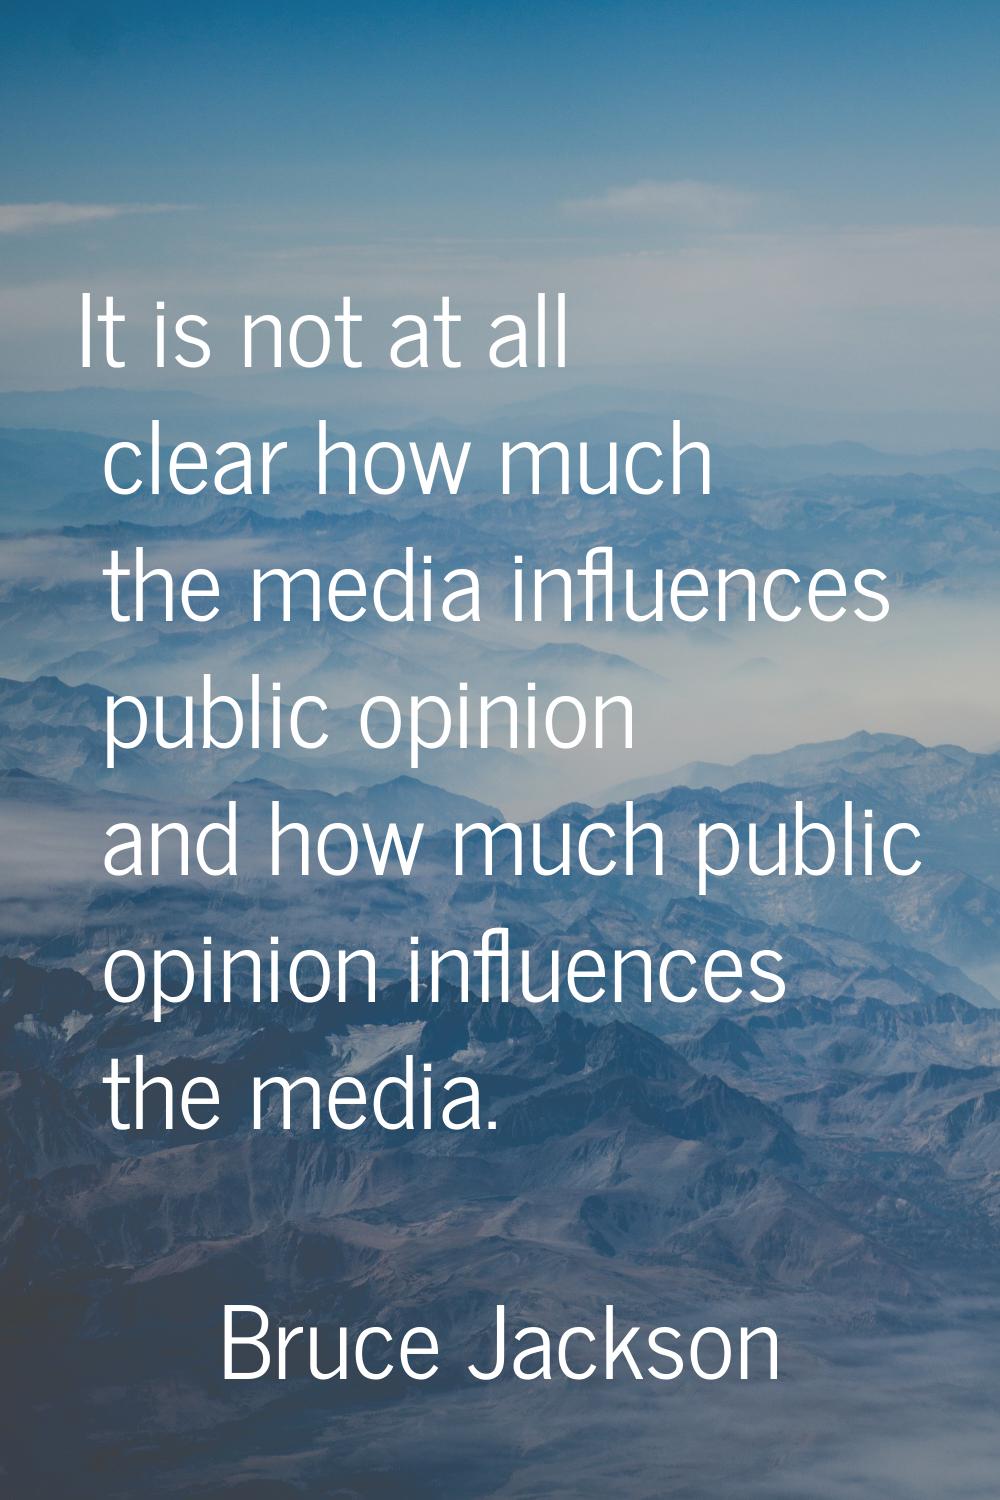 It is not at all clear how much the media influences public opinion and how much public opinion inf